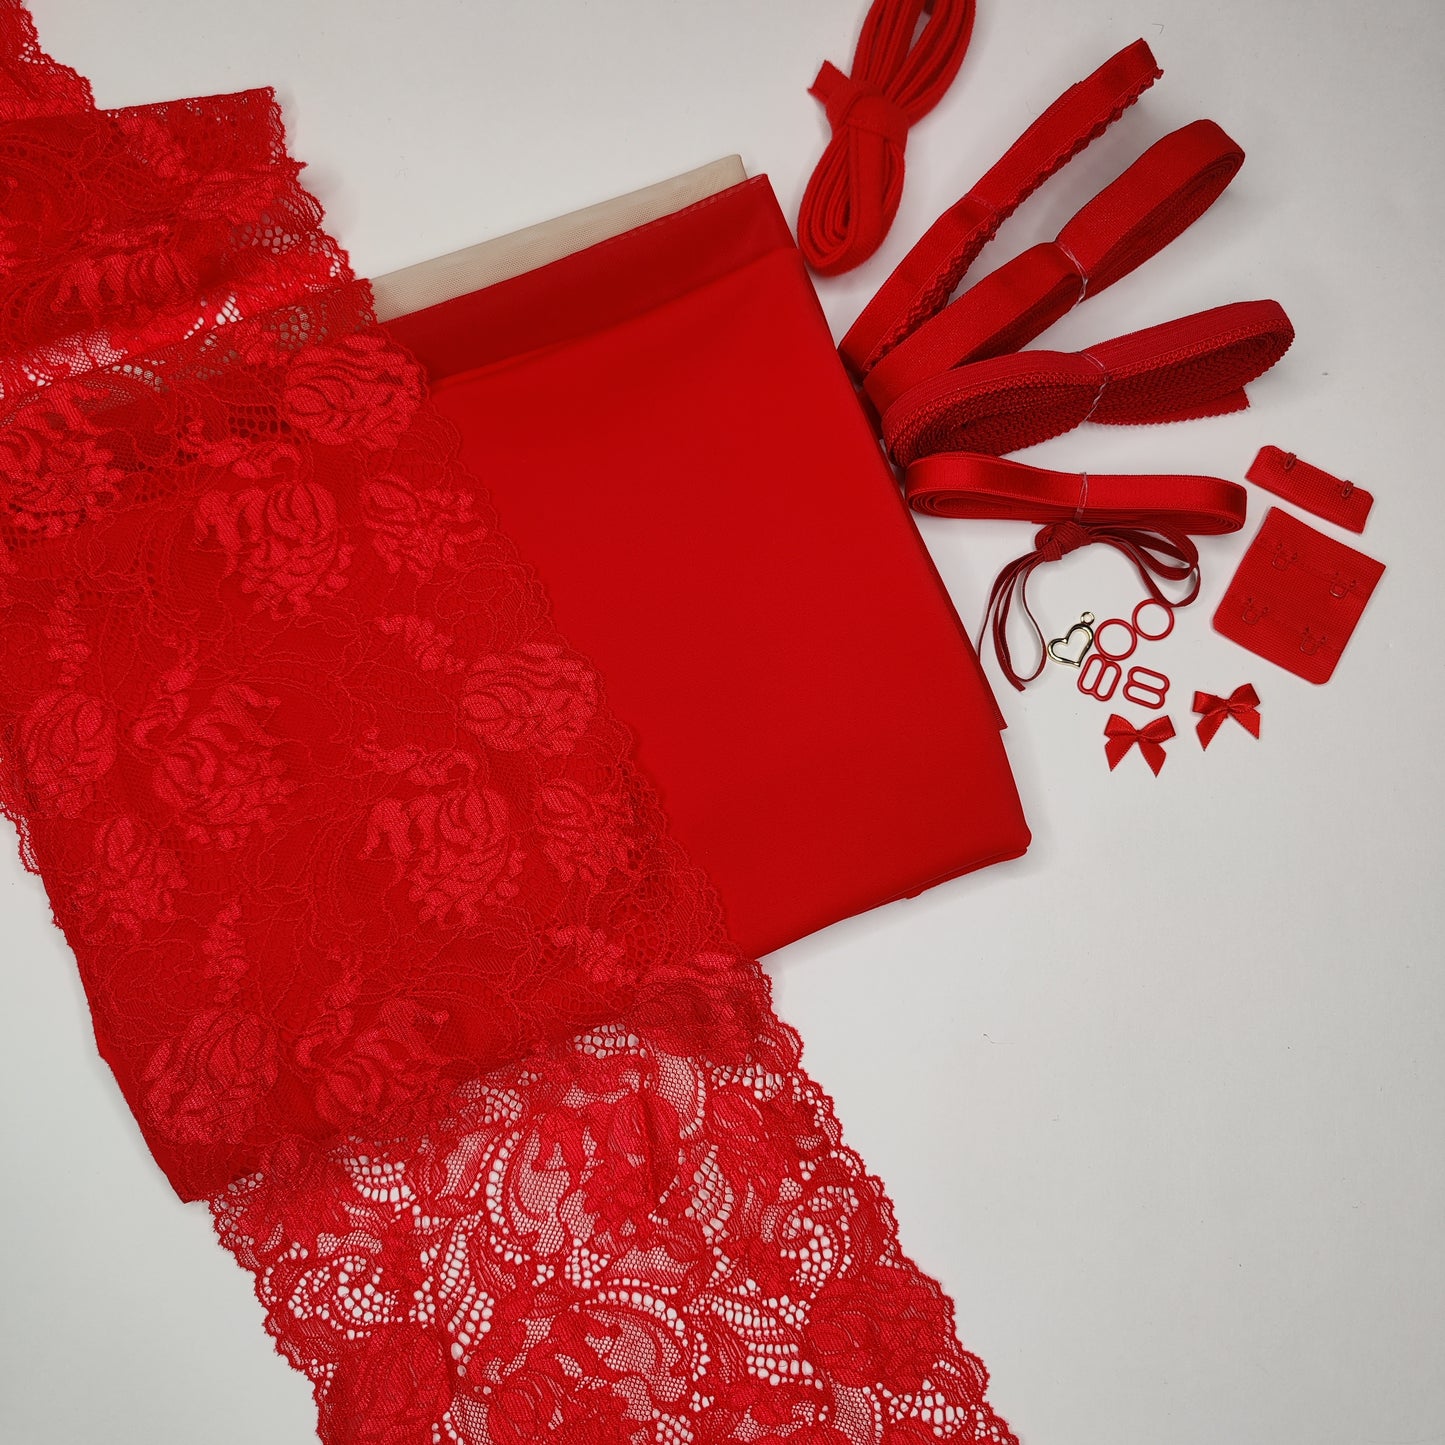 Bra + panties DIY sewing set / creative sewing package with <tc>lace</tc> and microfiber red IDnsx1